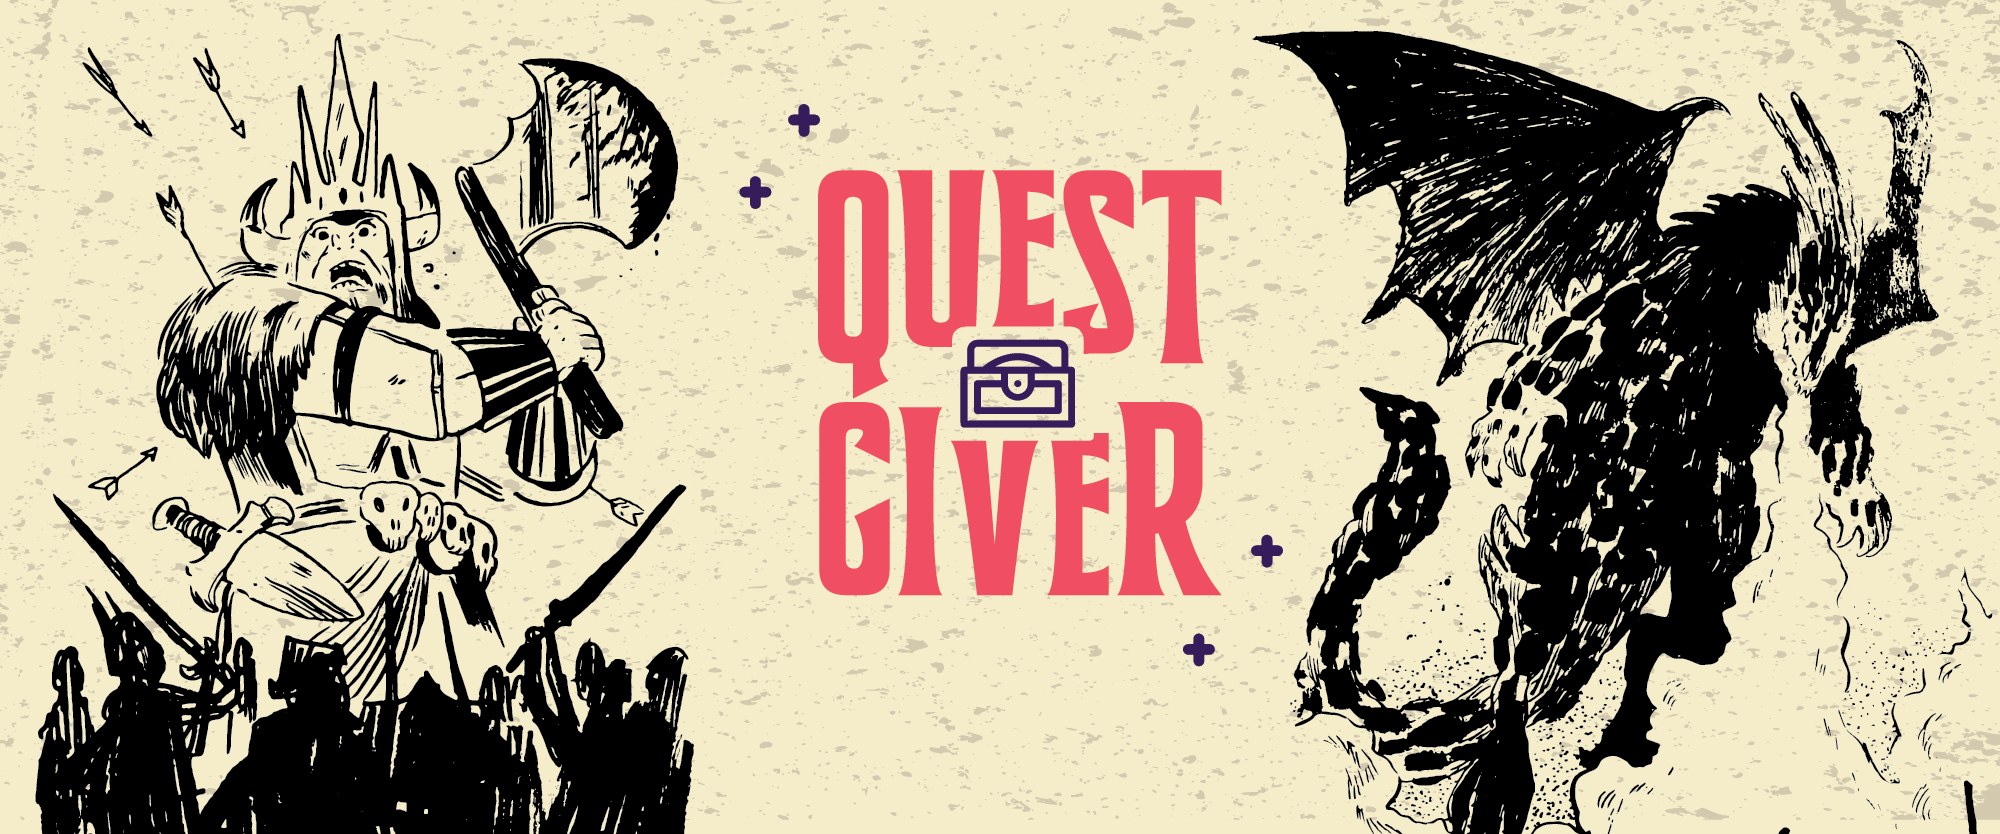 Quest Giver